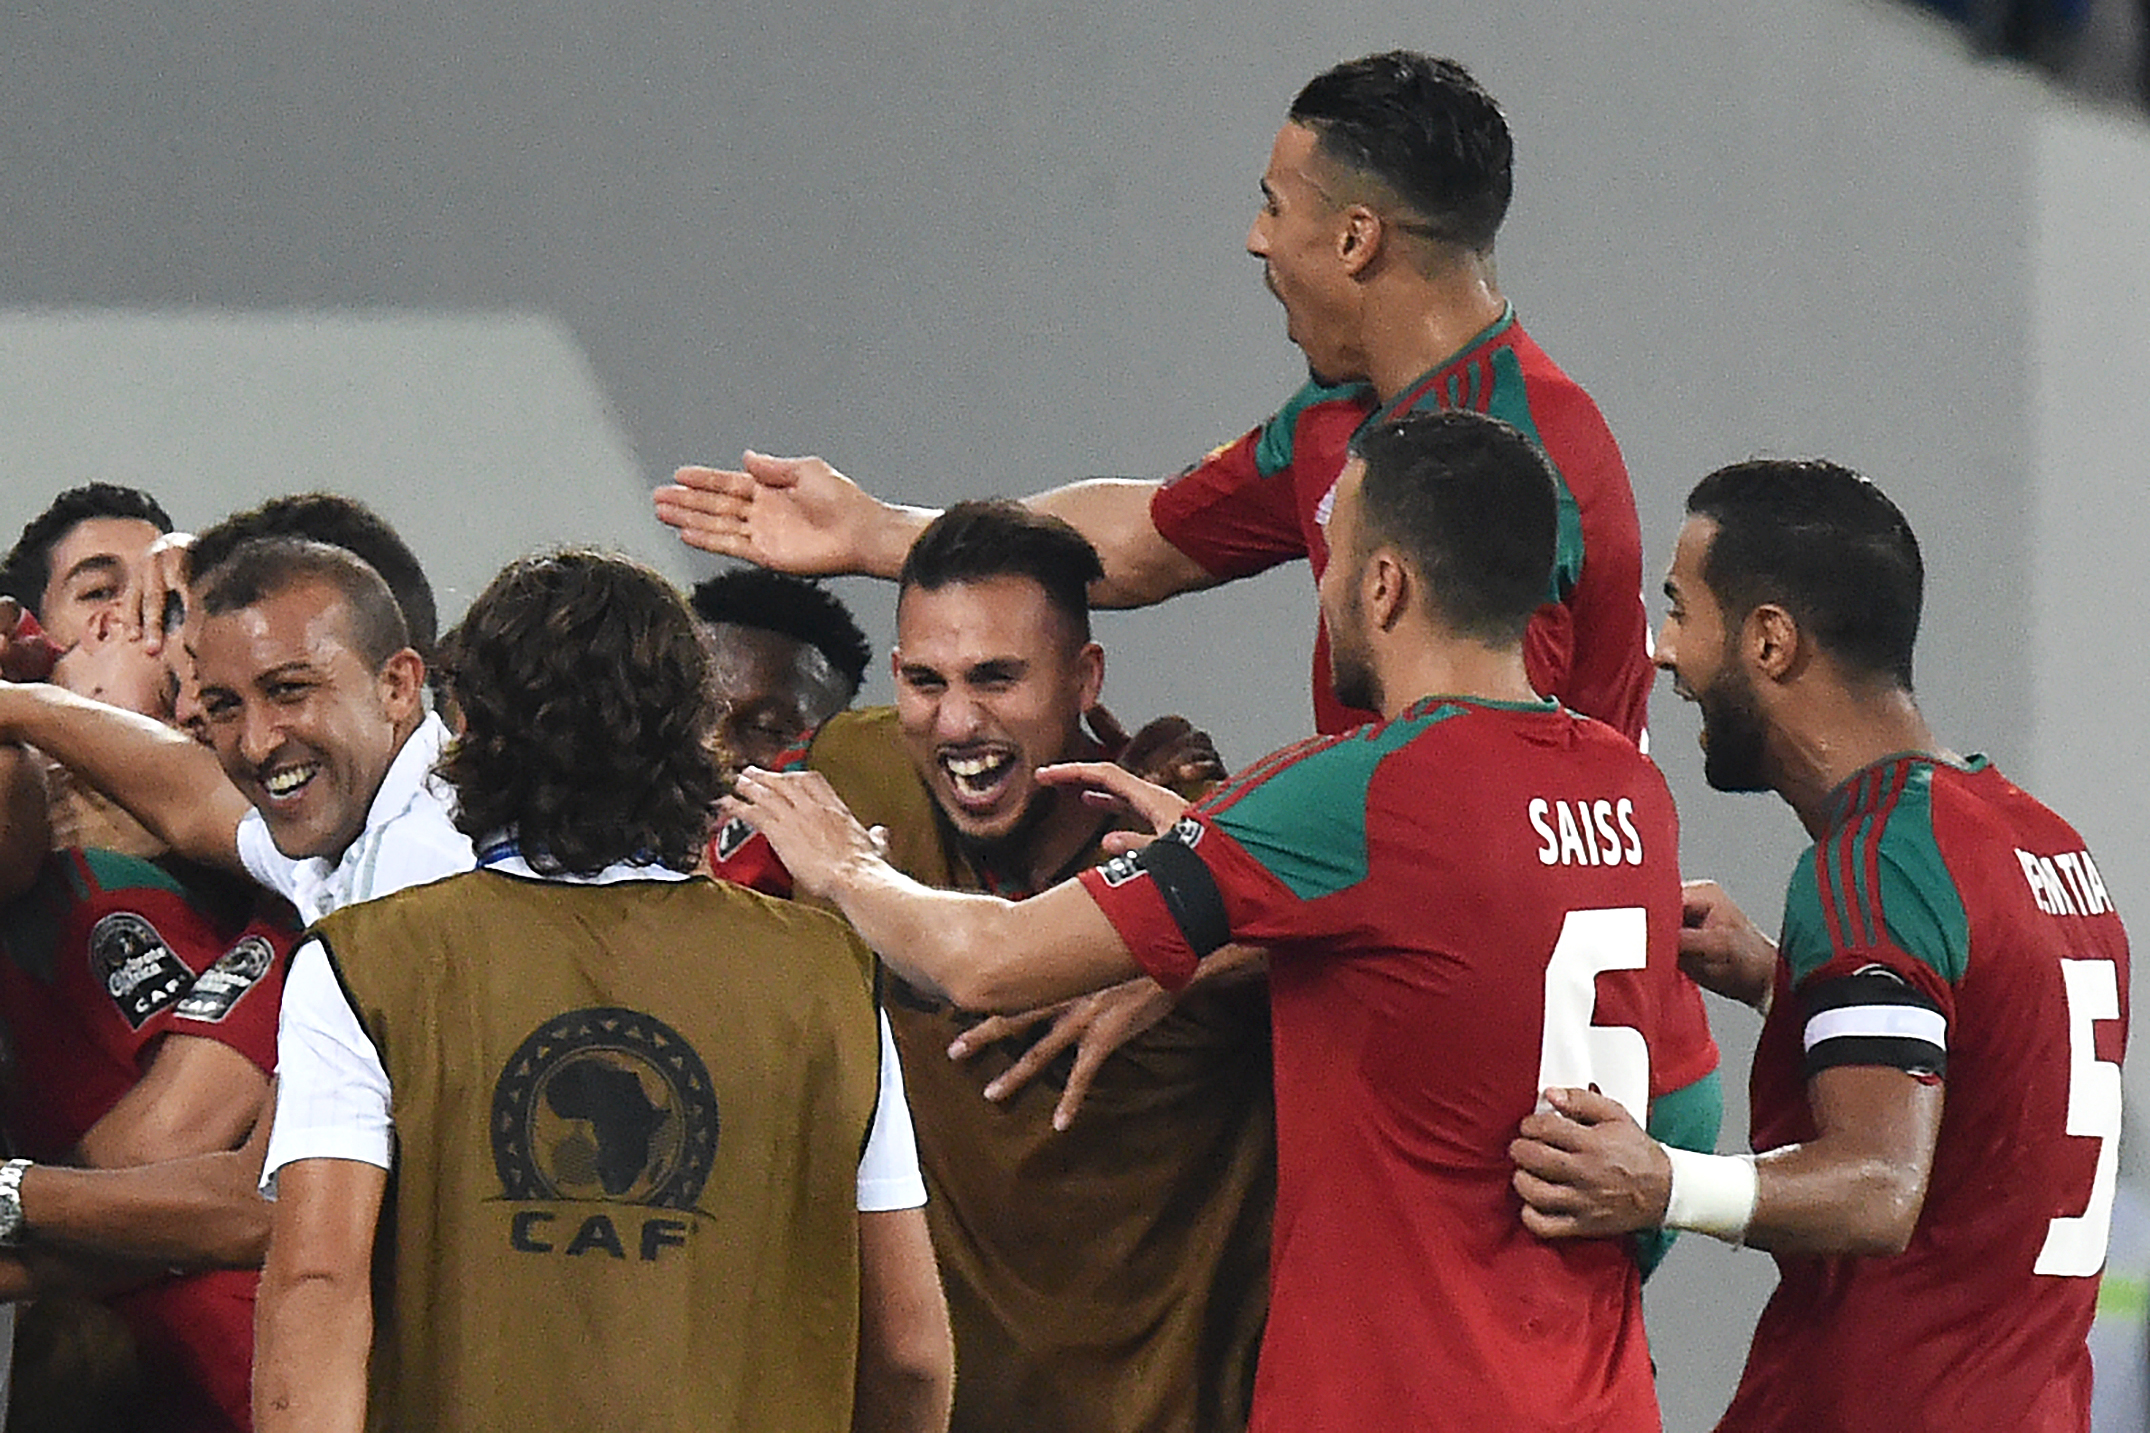 images.performgroup.com/di/library/goal_arabic/e1/50/morocco-togo-africa-cup-of-nations-2017_jo5ie9nv3e1ezkna5rxhos8s